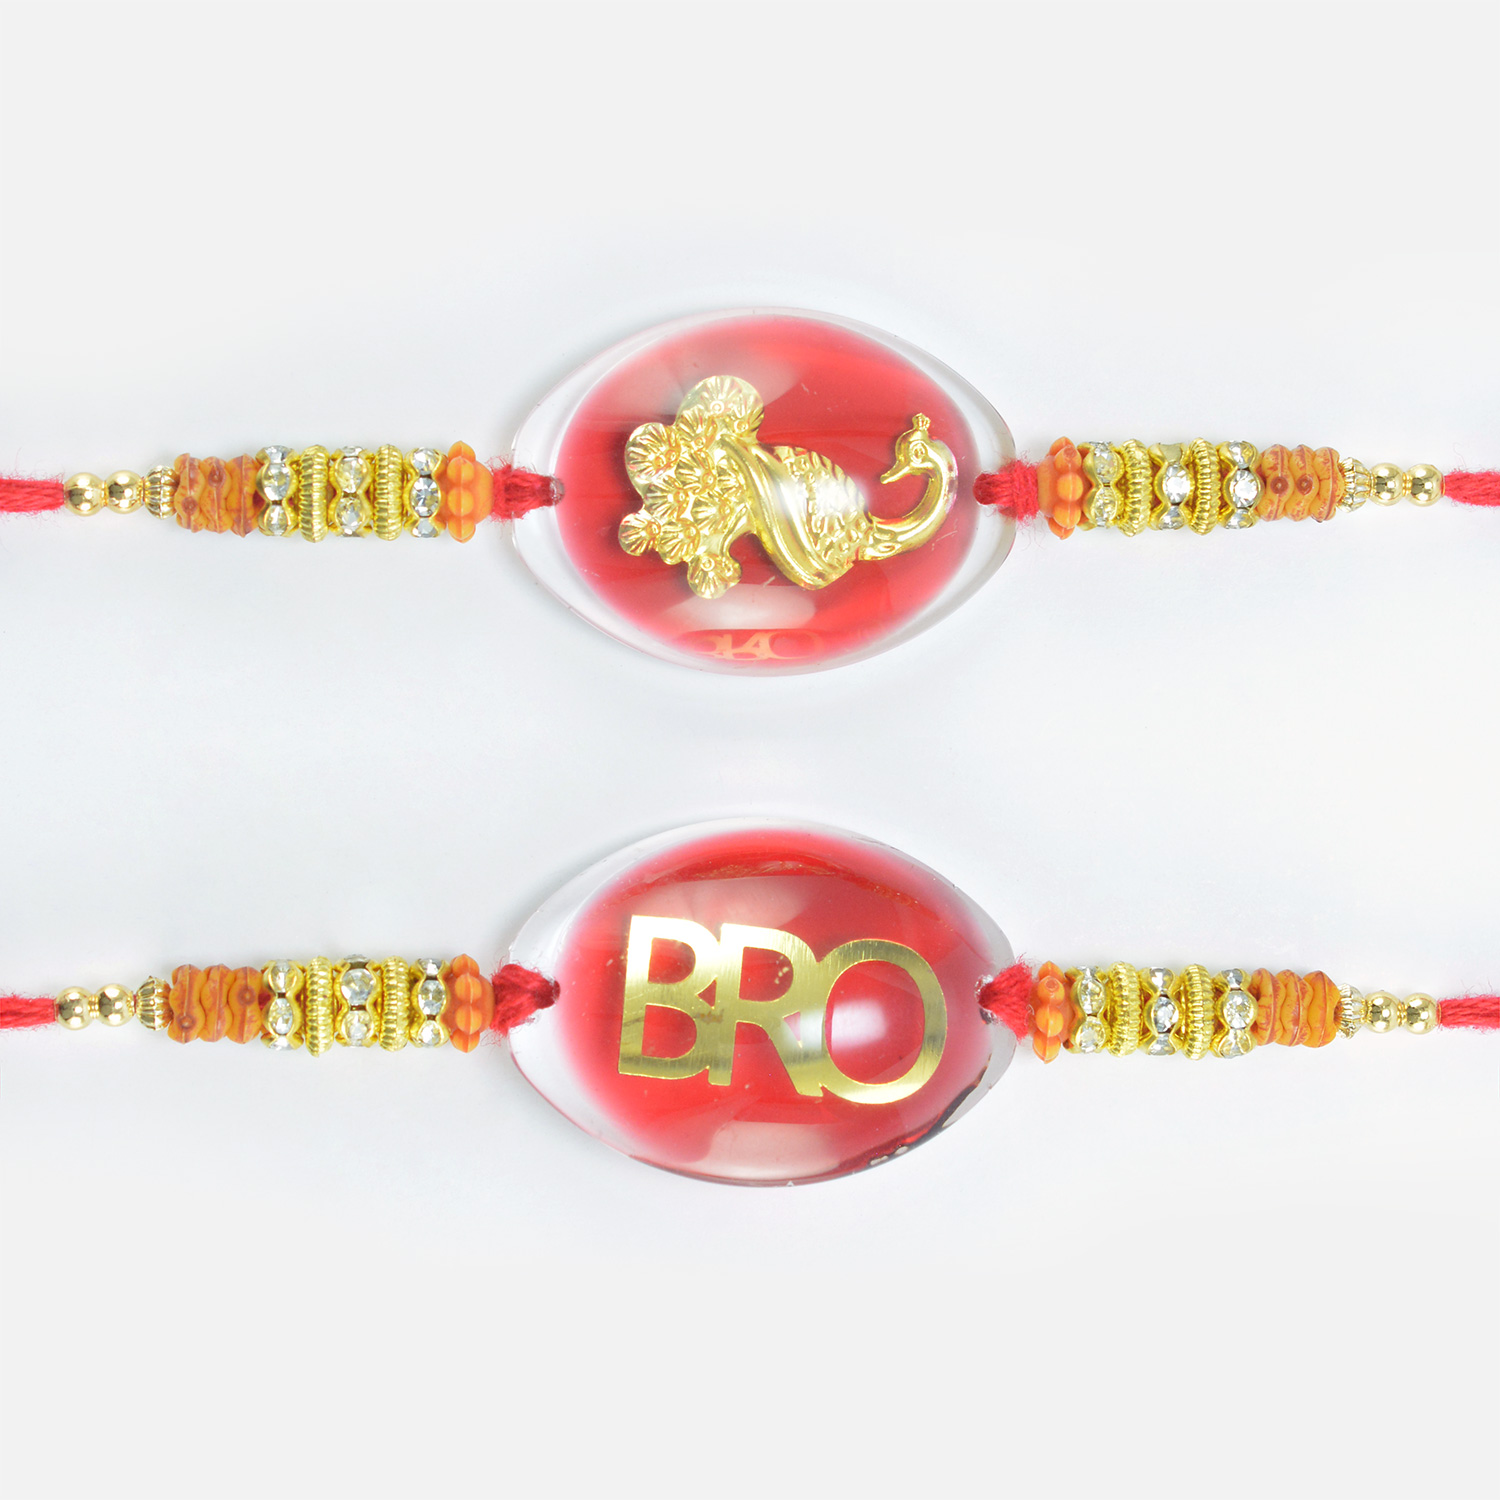 Golden Peacock and Bro Written in Transparent Glass on Red Base Amazing Rakhi Set